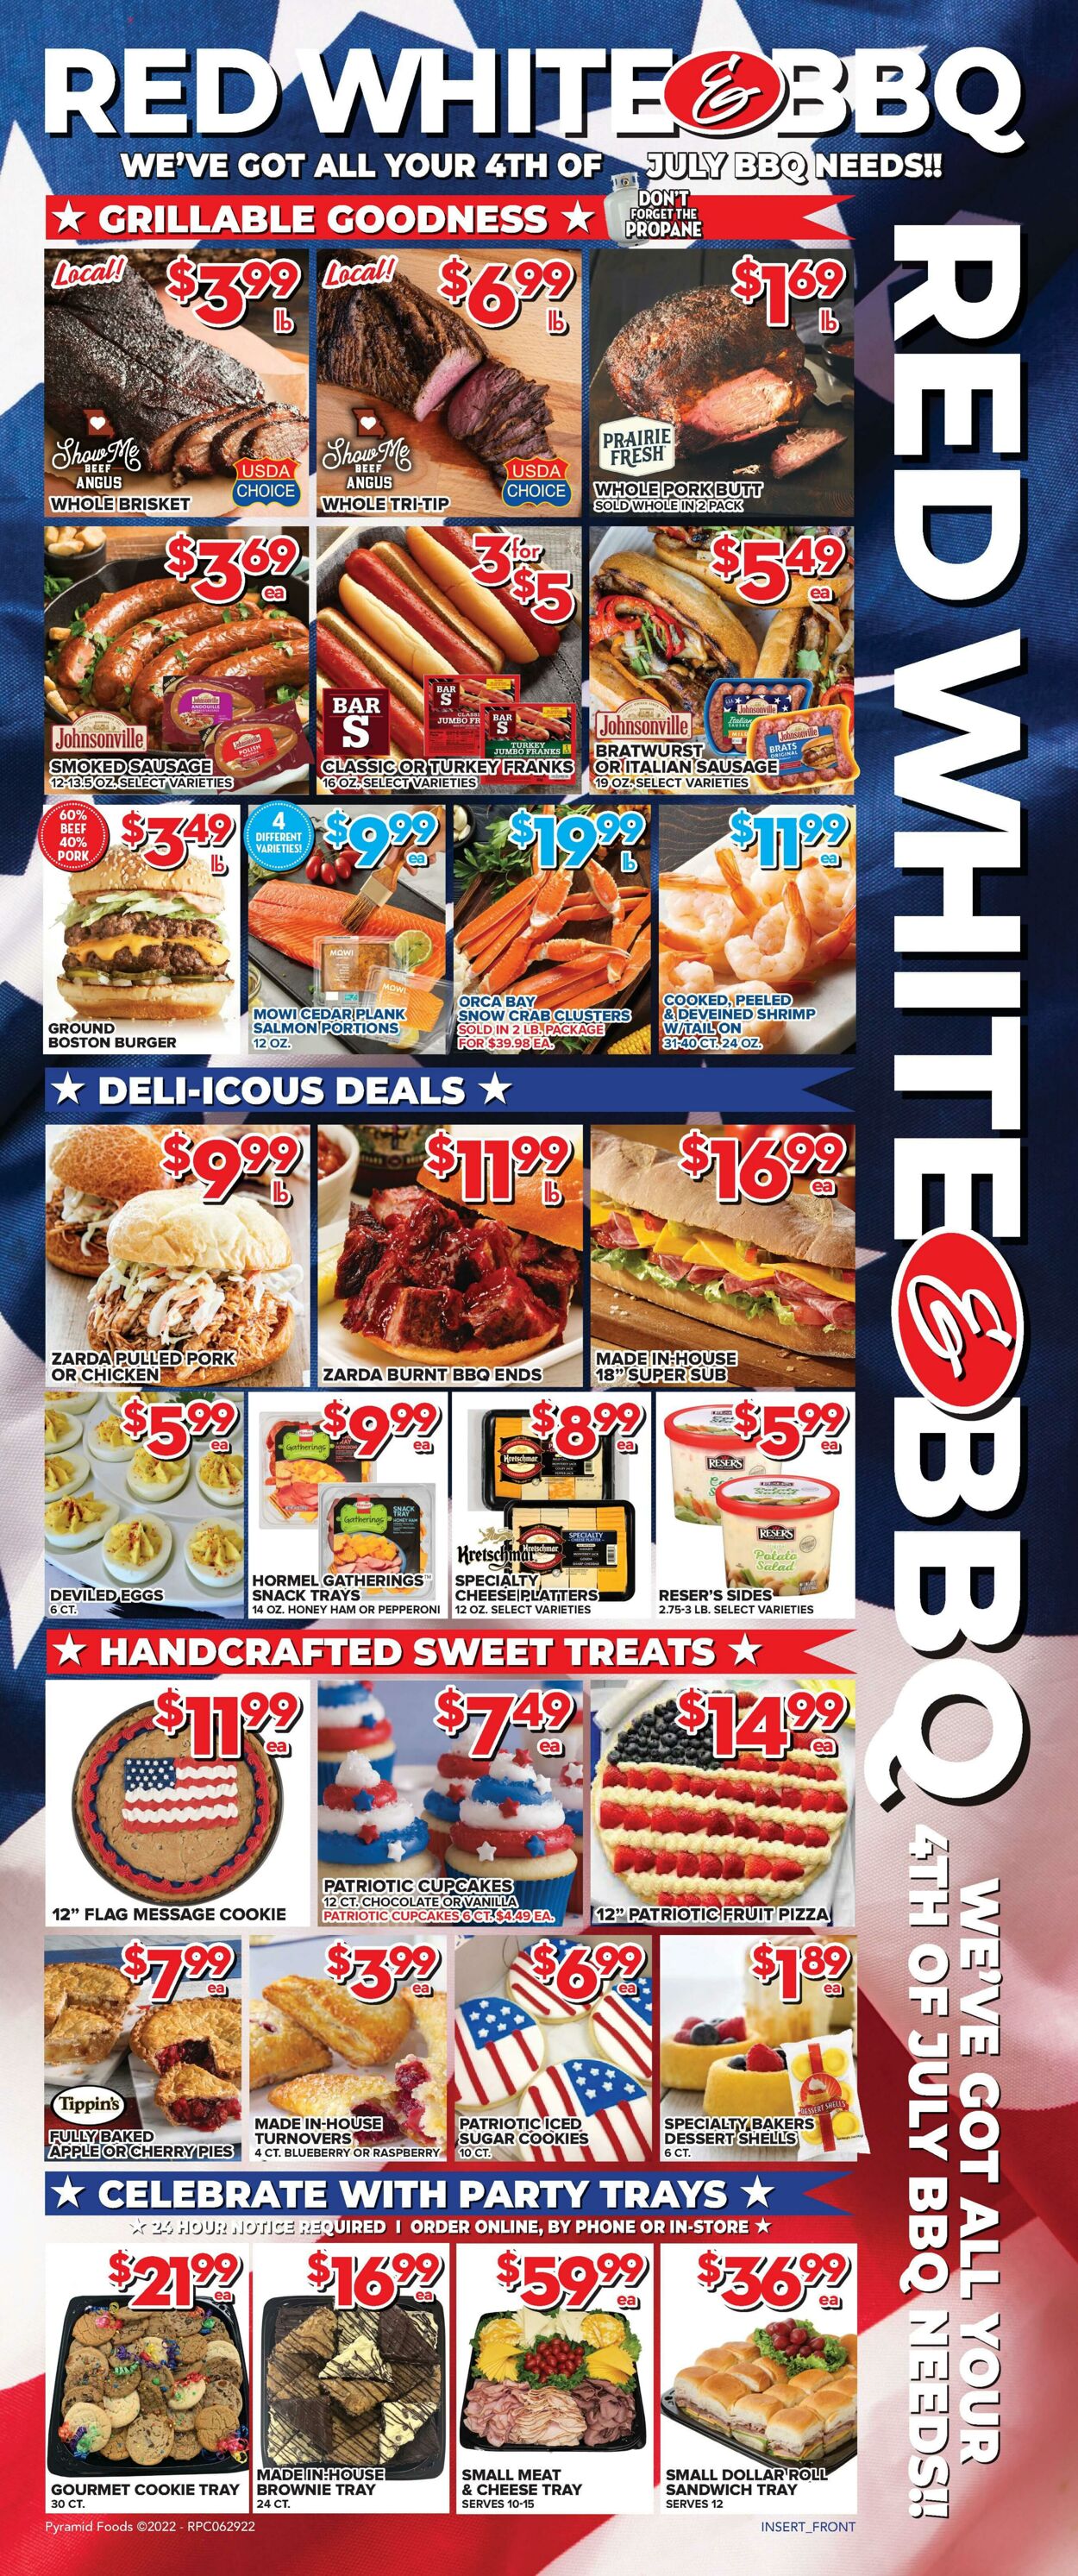 Weekly ad Price Cutter 06/29/2022 - 07/05/2022